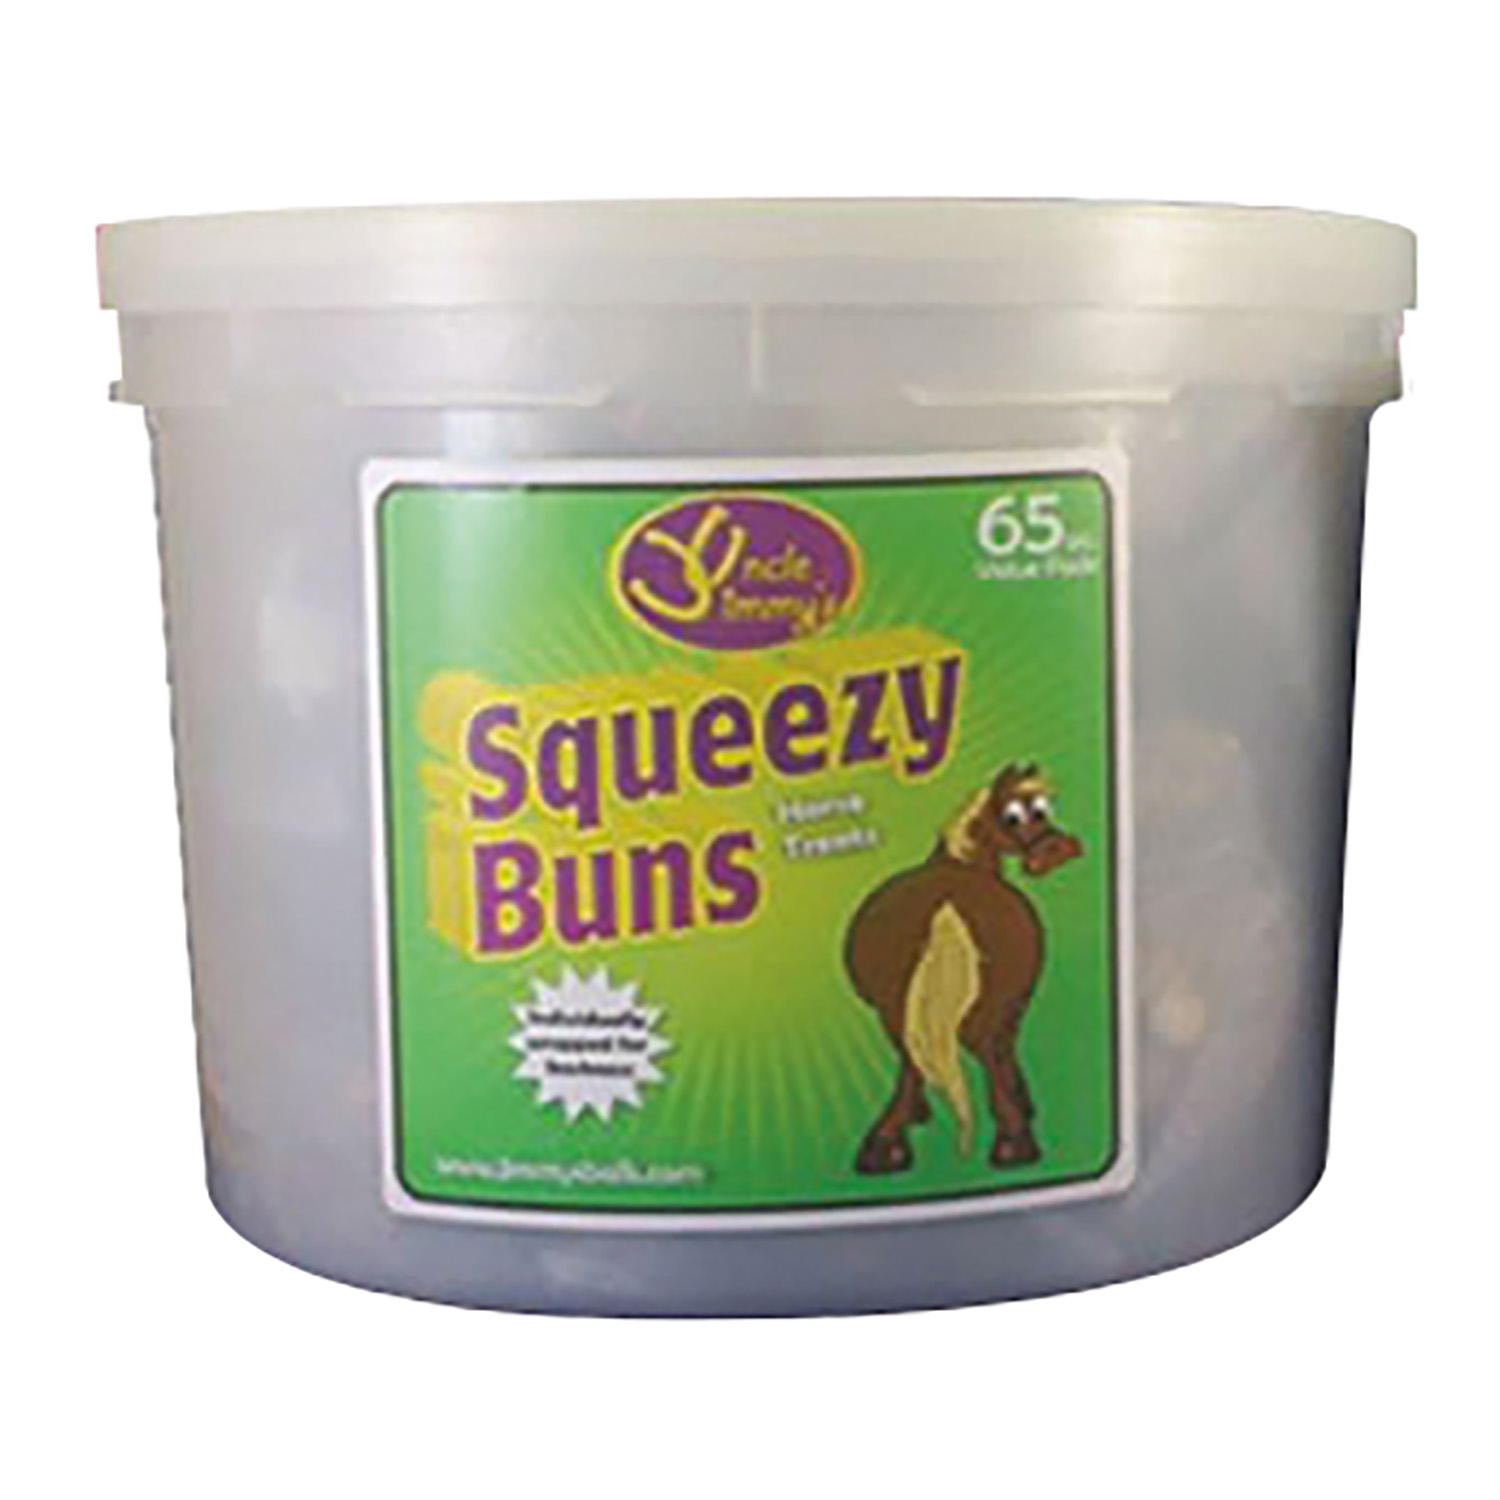 UNCLE JIMMYS SQUEEZY BUNS 65 PACK 65 PACK